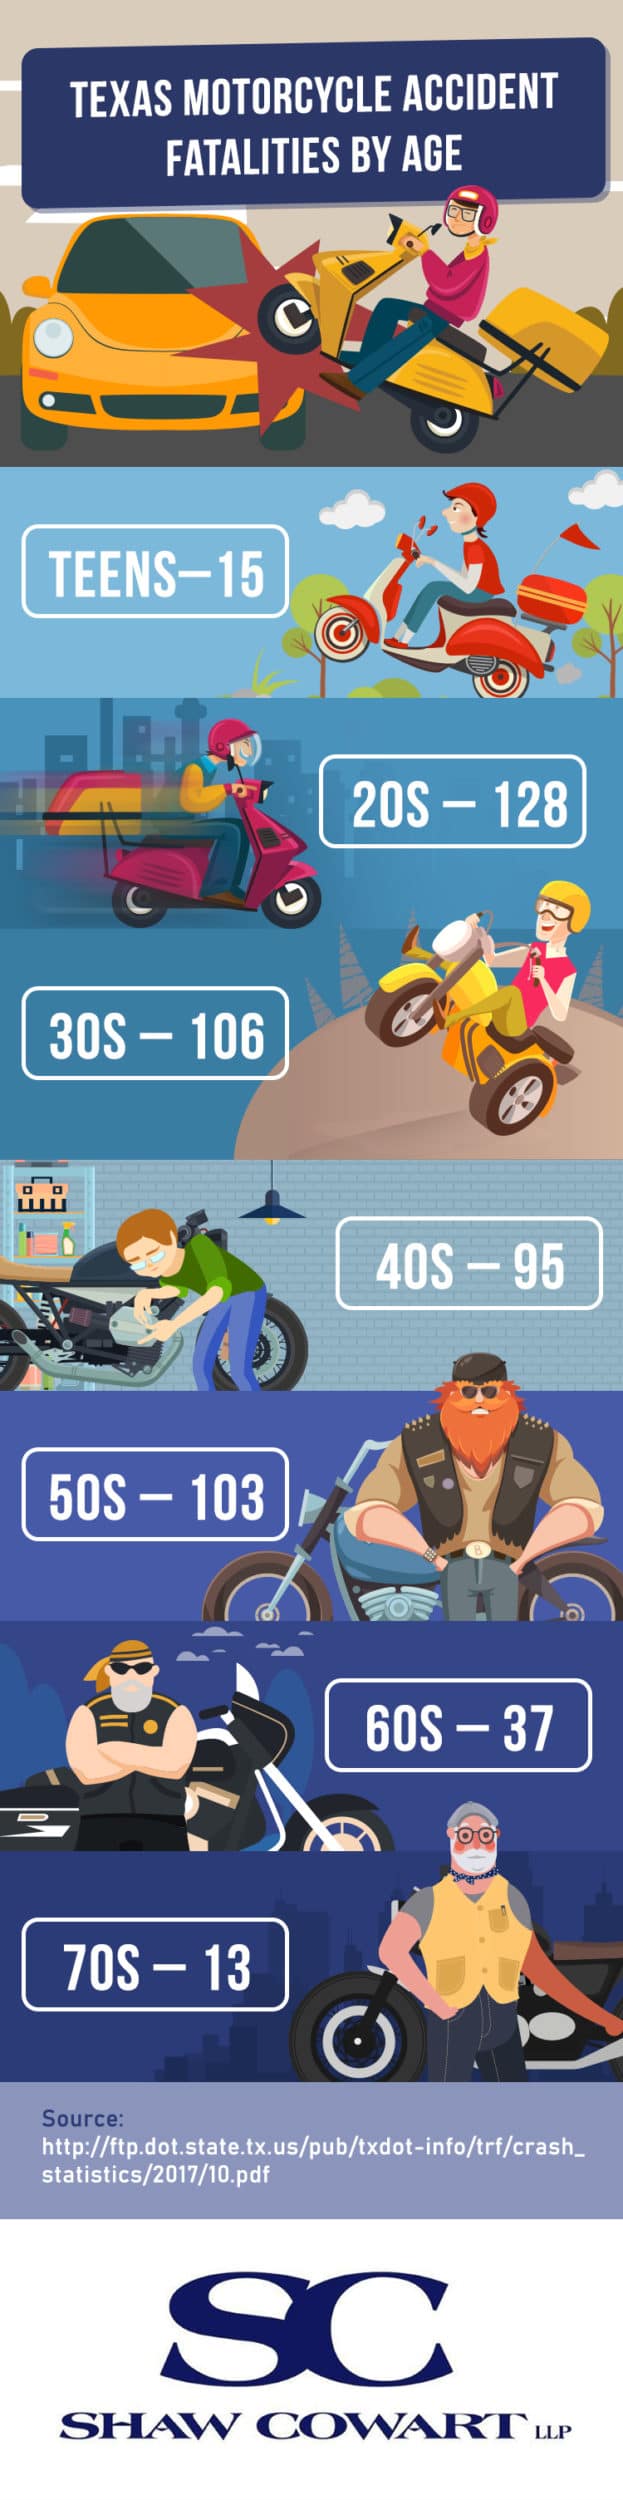 infographic - Texas motorcycle accident fatalities by age